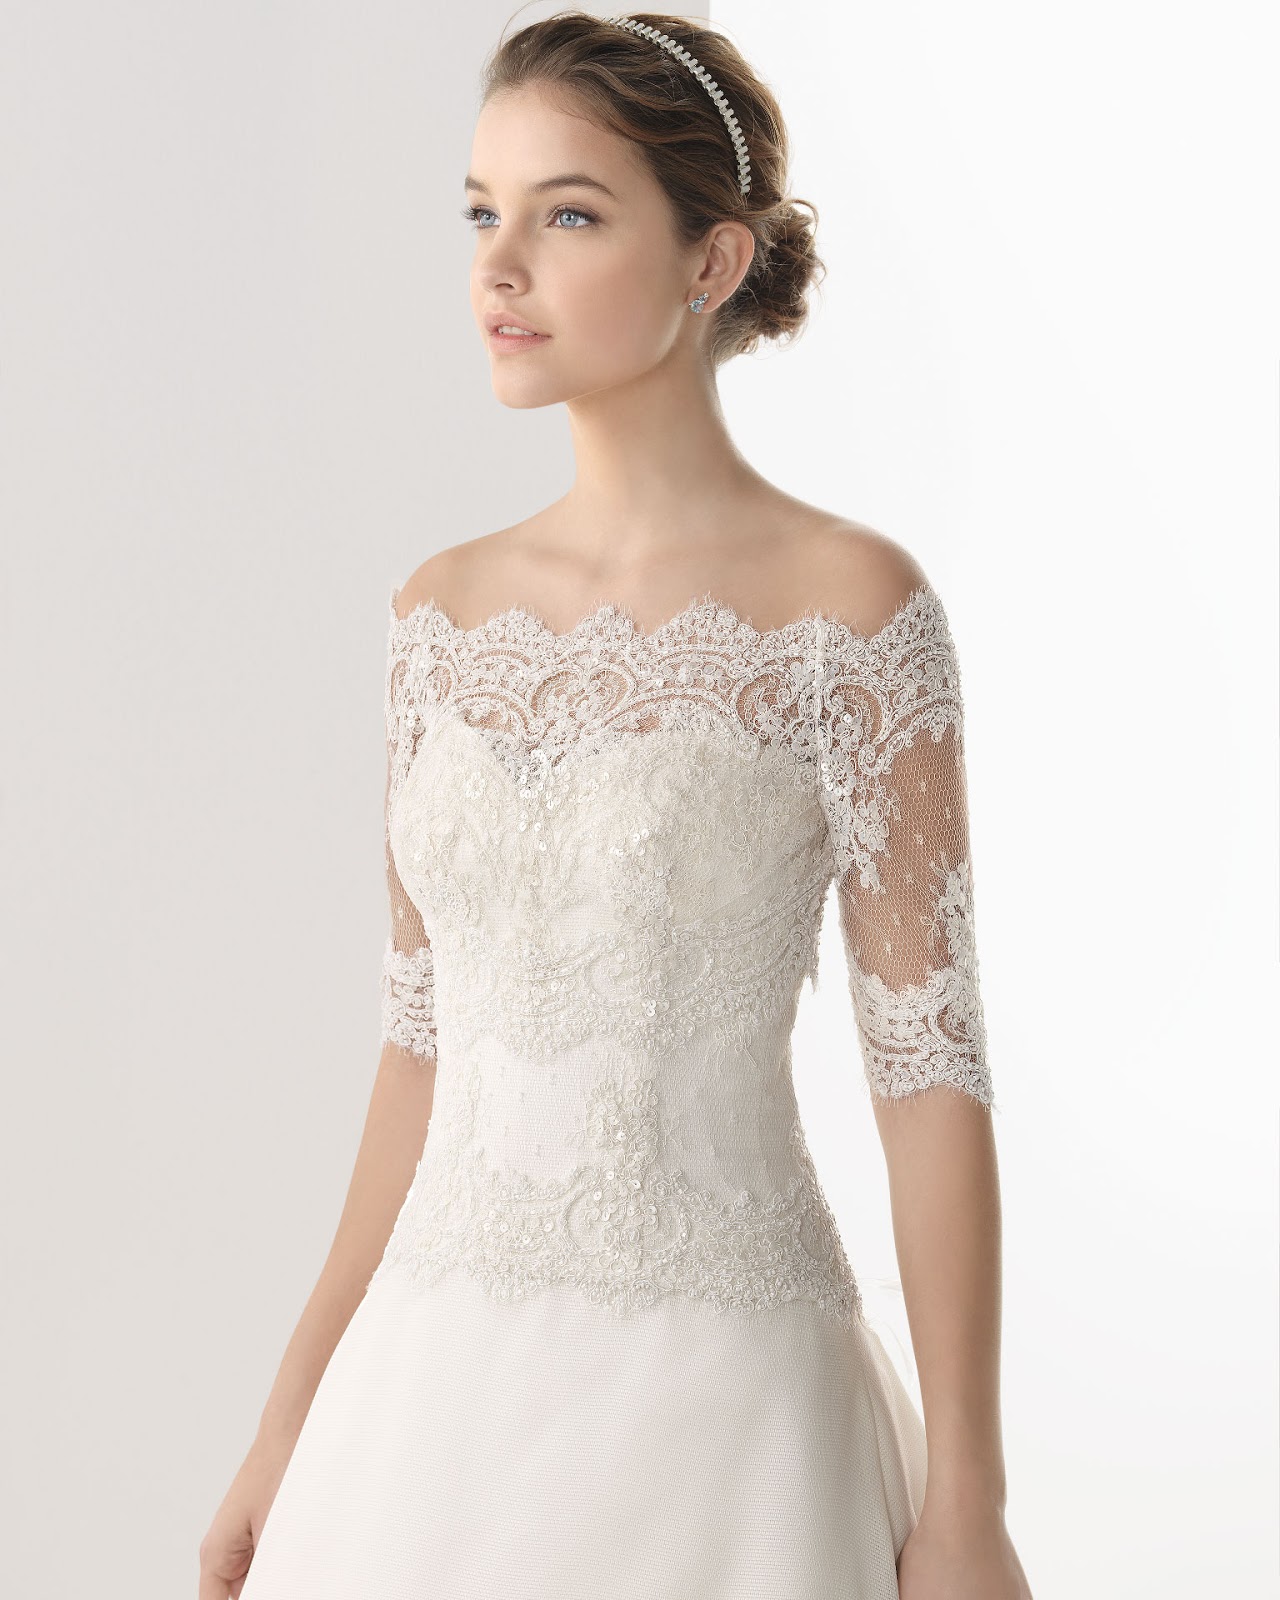 Perkins wedding dresses with long sleeves and lace stores usa hamp;m, South indian latest blouse designs, givenchy t shirt black stars. 